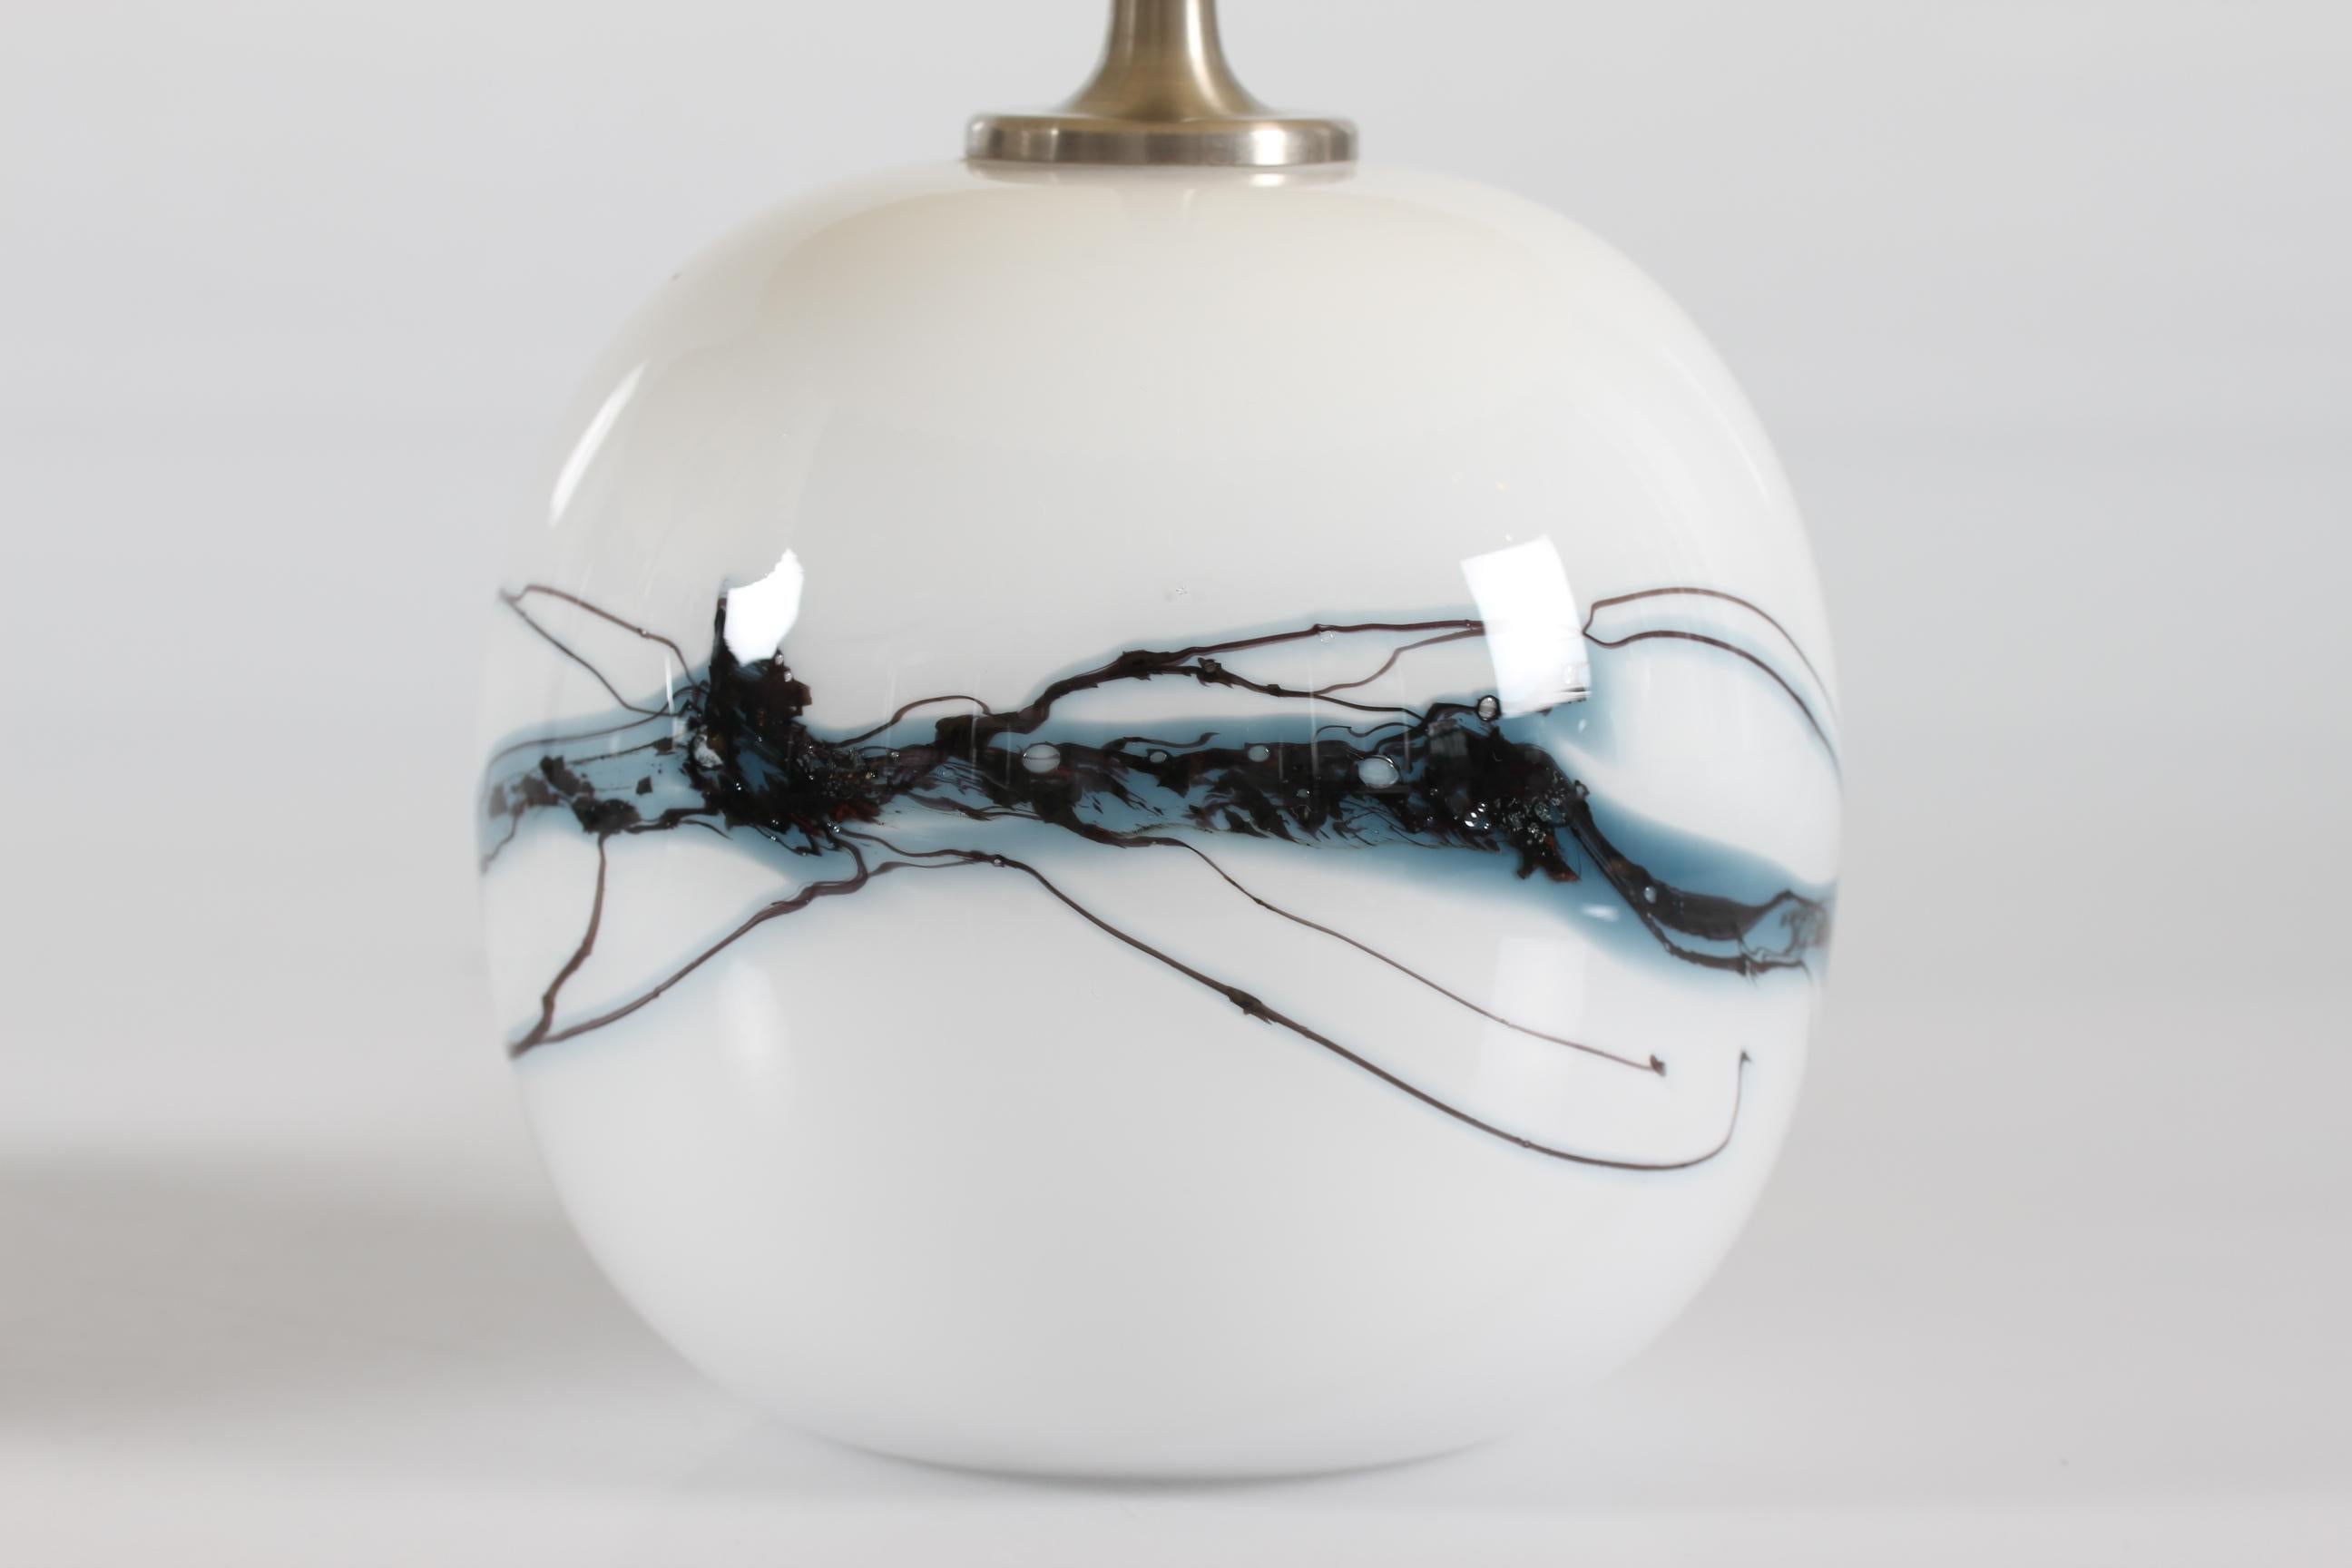 A pair of sakura small ball-shaped table lamps designed by Michael Bang for Holmegaard Glass-works.
Manufactured in Denmark 1980´s

The lamps are made of mouth-blown white opaline glass with an abstract decoration in blue and black colors.